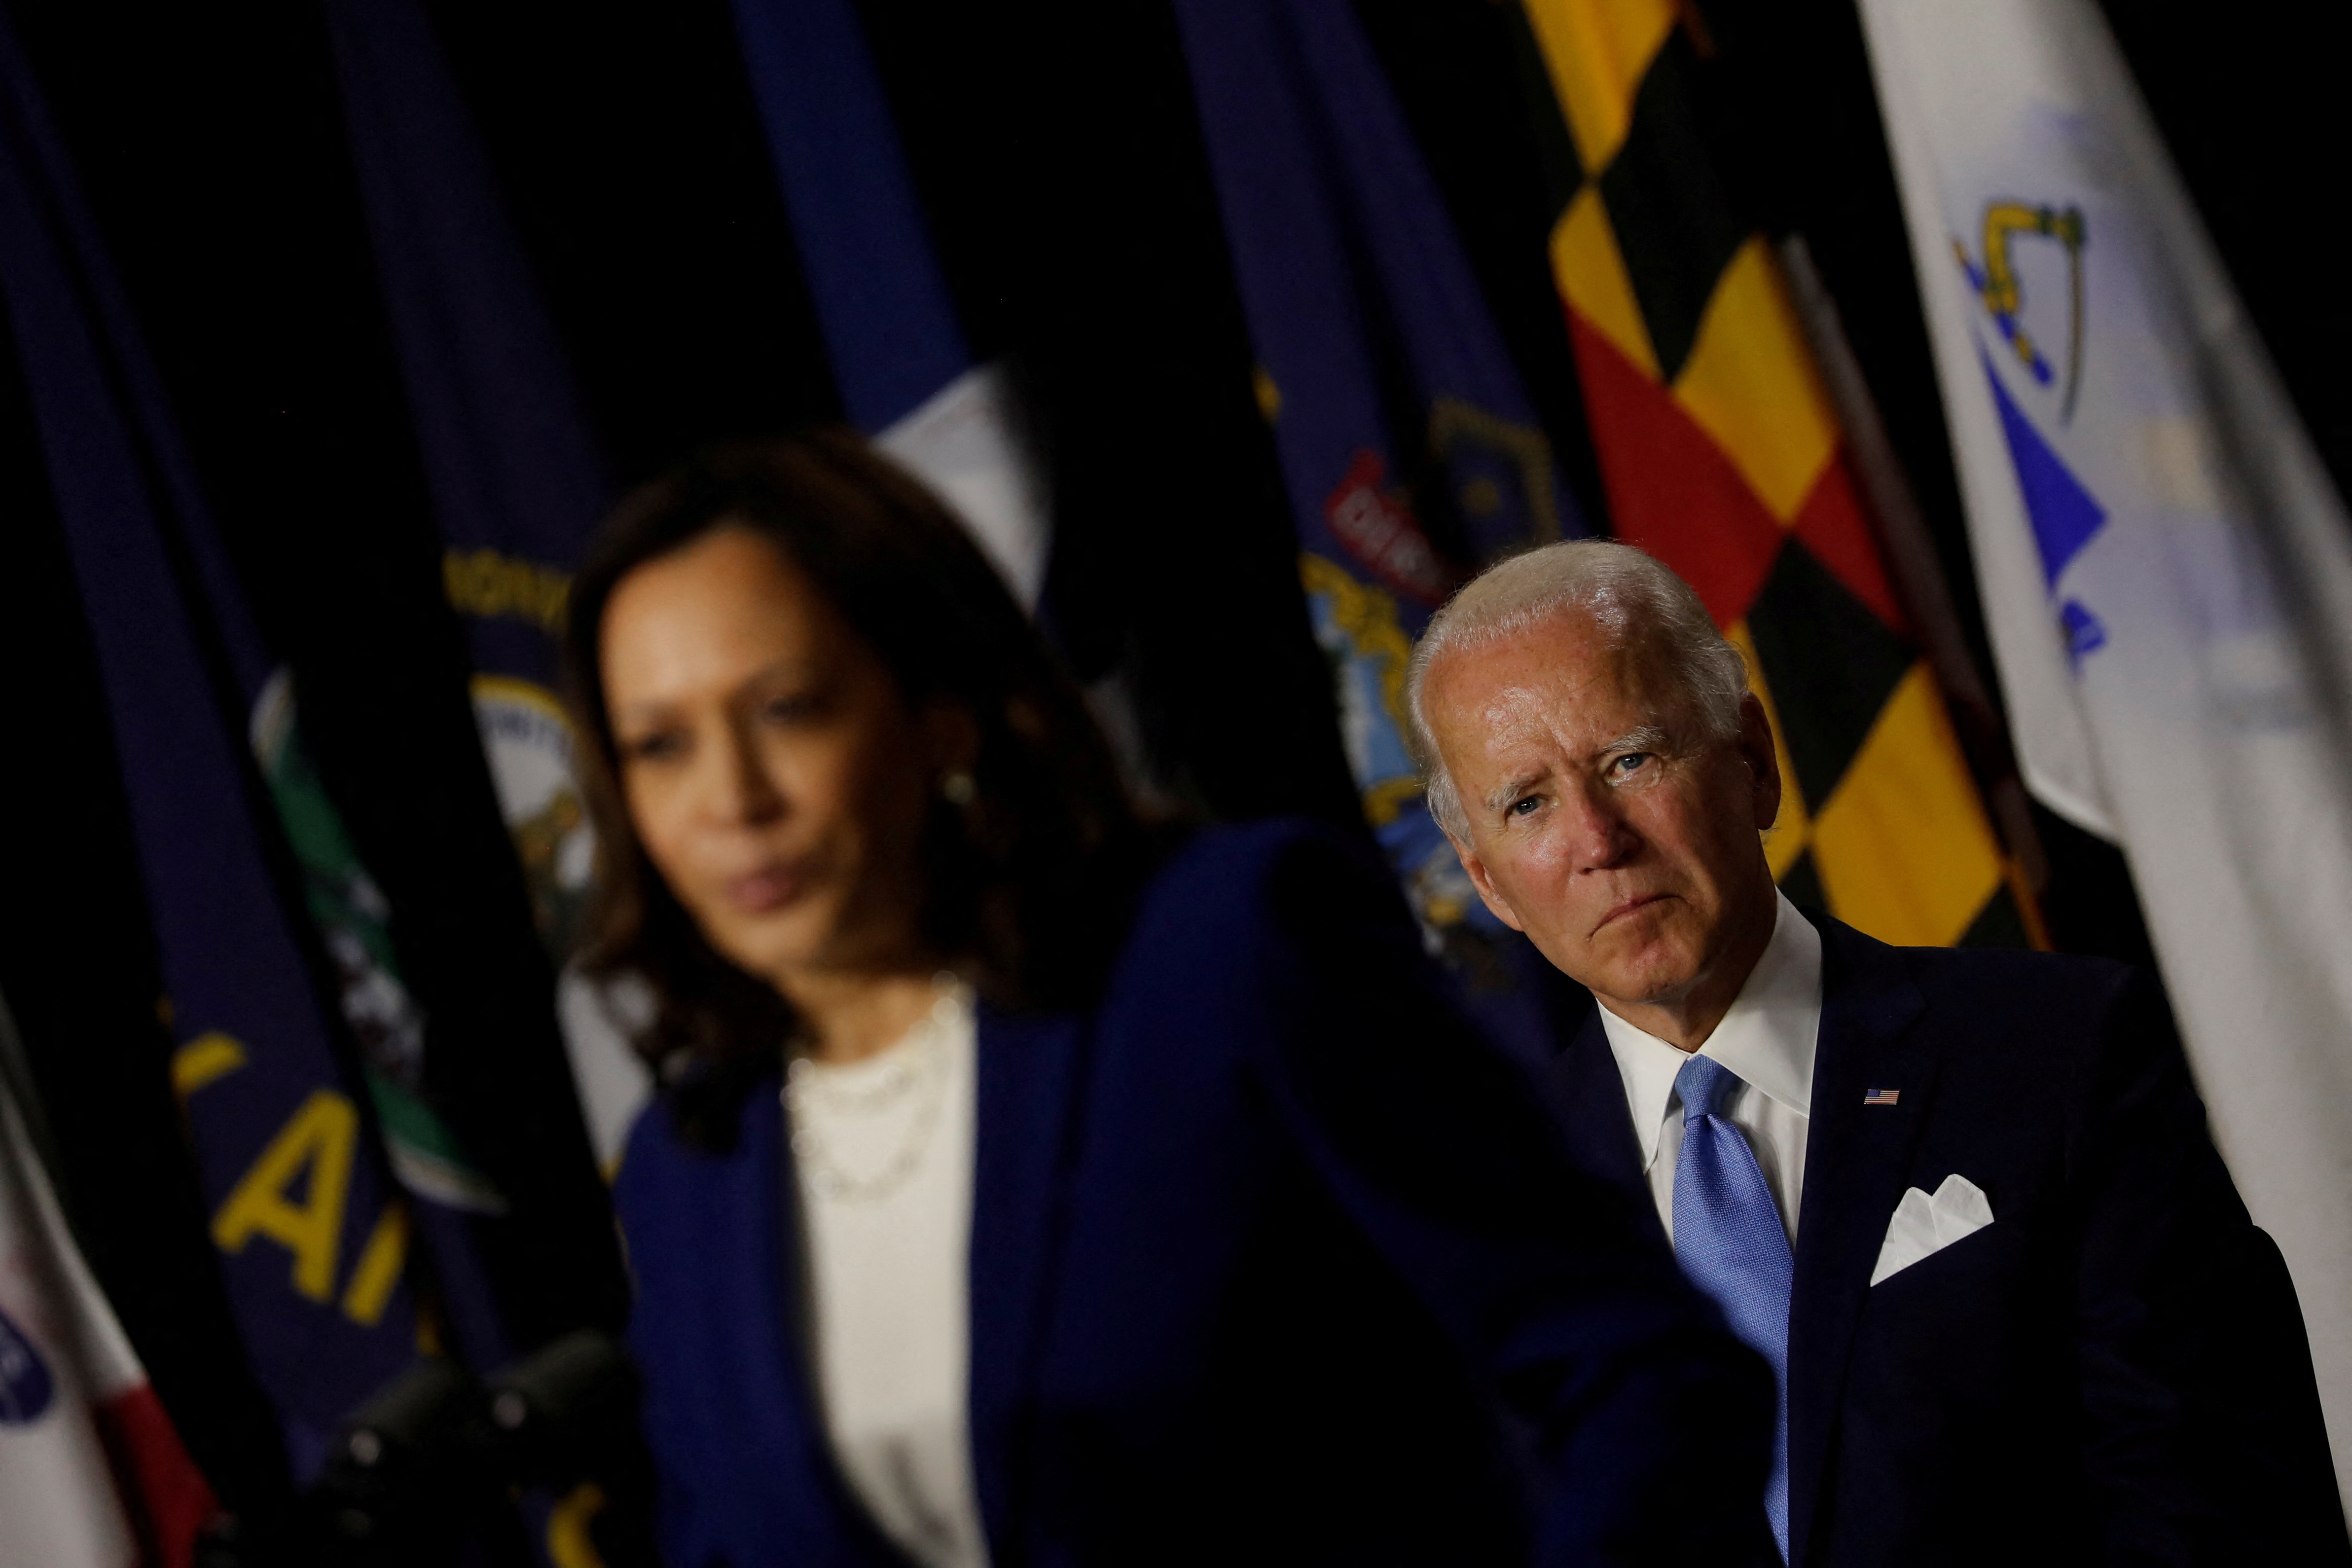 Democratic presidential candidate Biden and vice presidential candidate Harris hold first joint campaign appearance as a ticket in Wilmington, Delaware